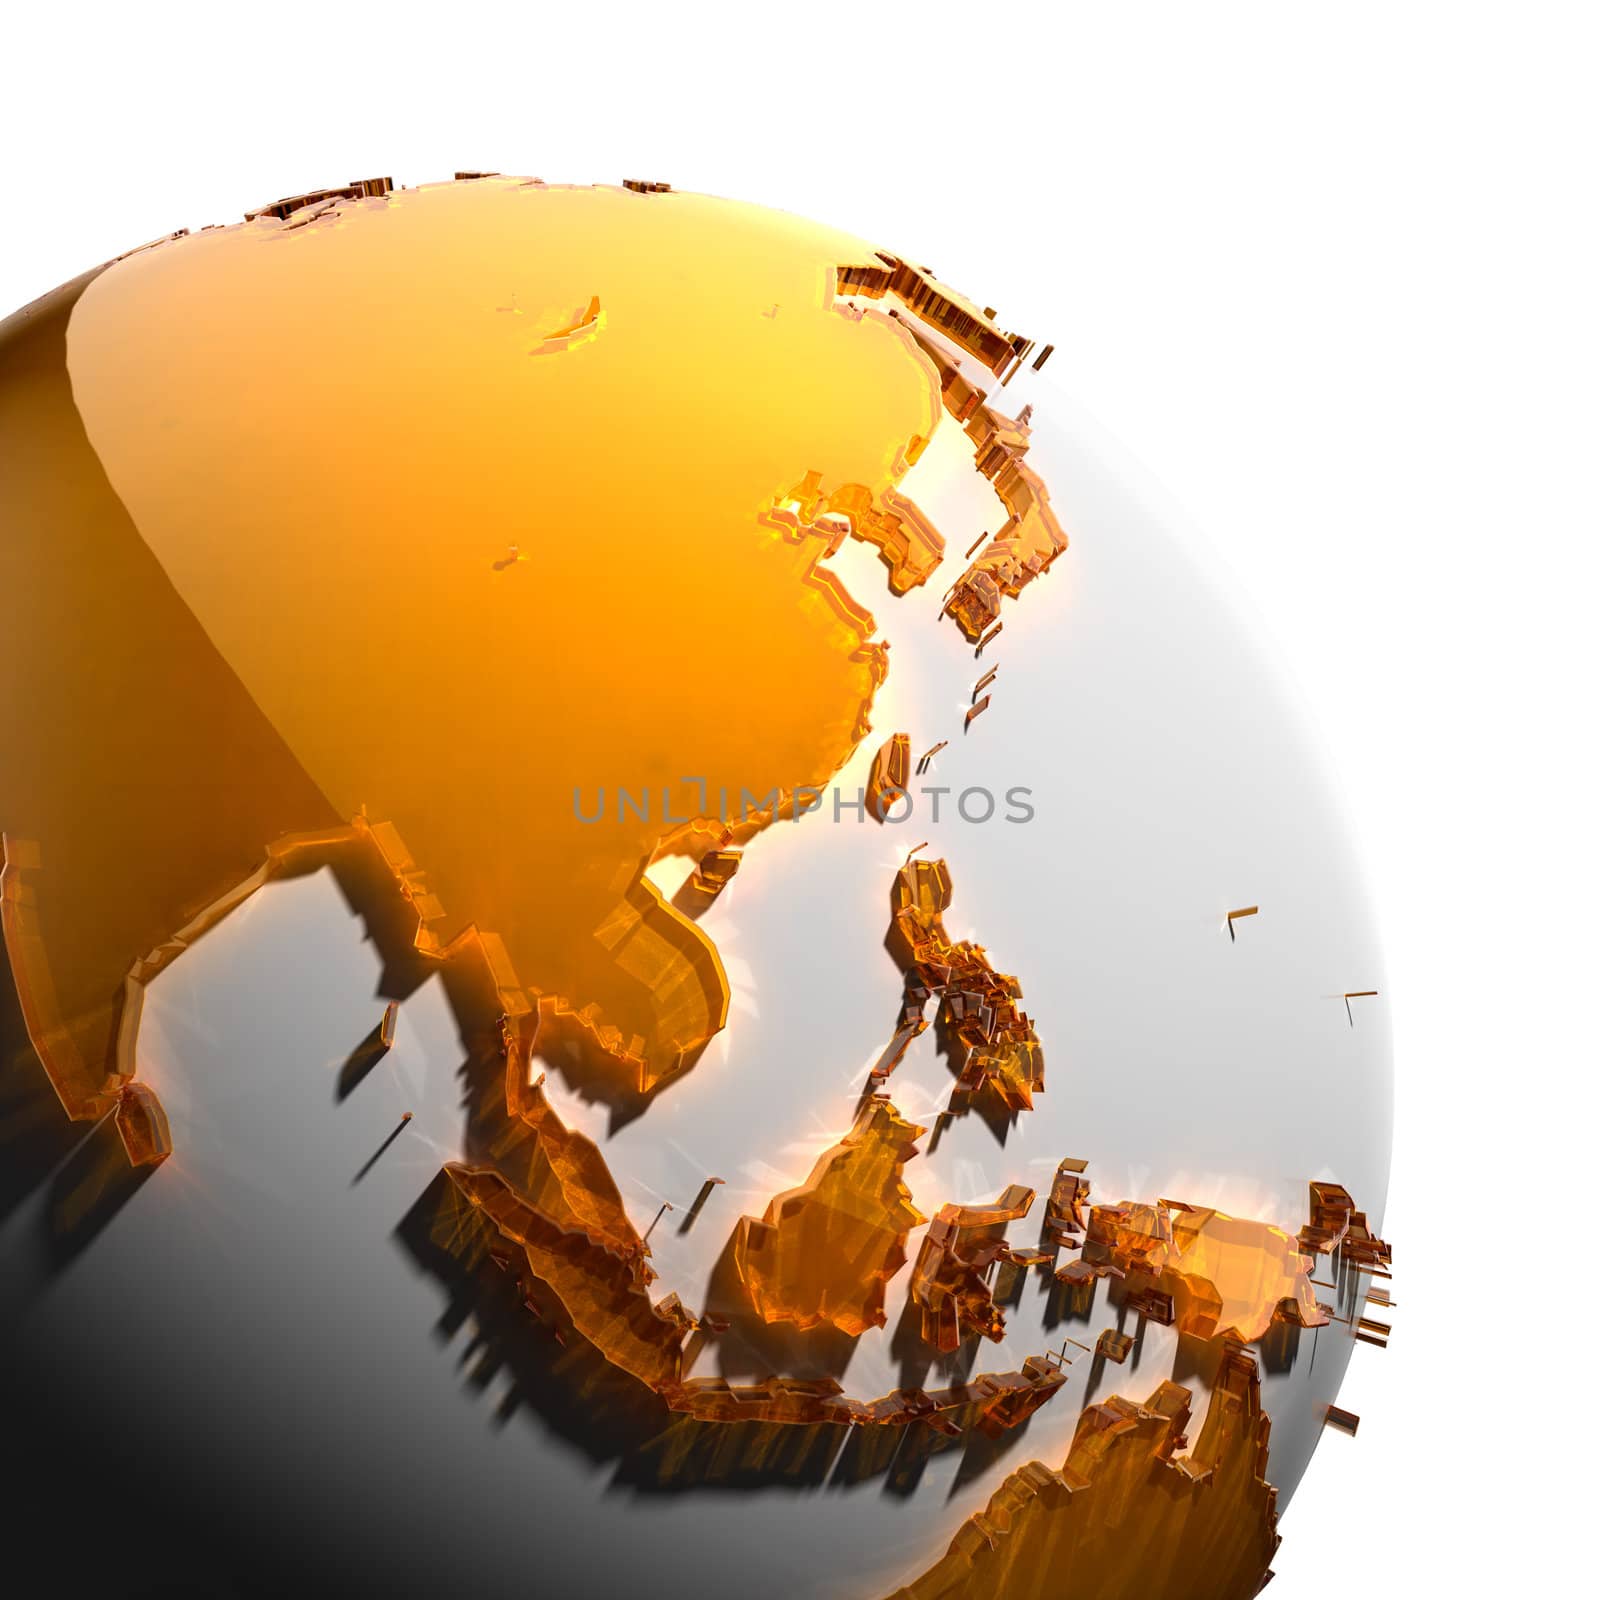 A fragment of the Earth with continents of orange glass by Antartis